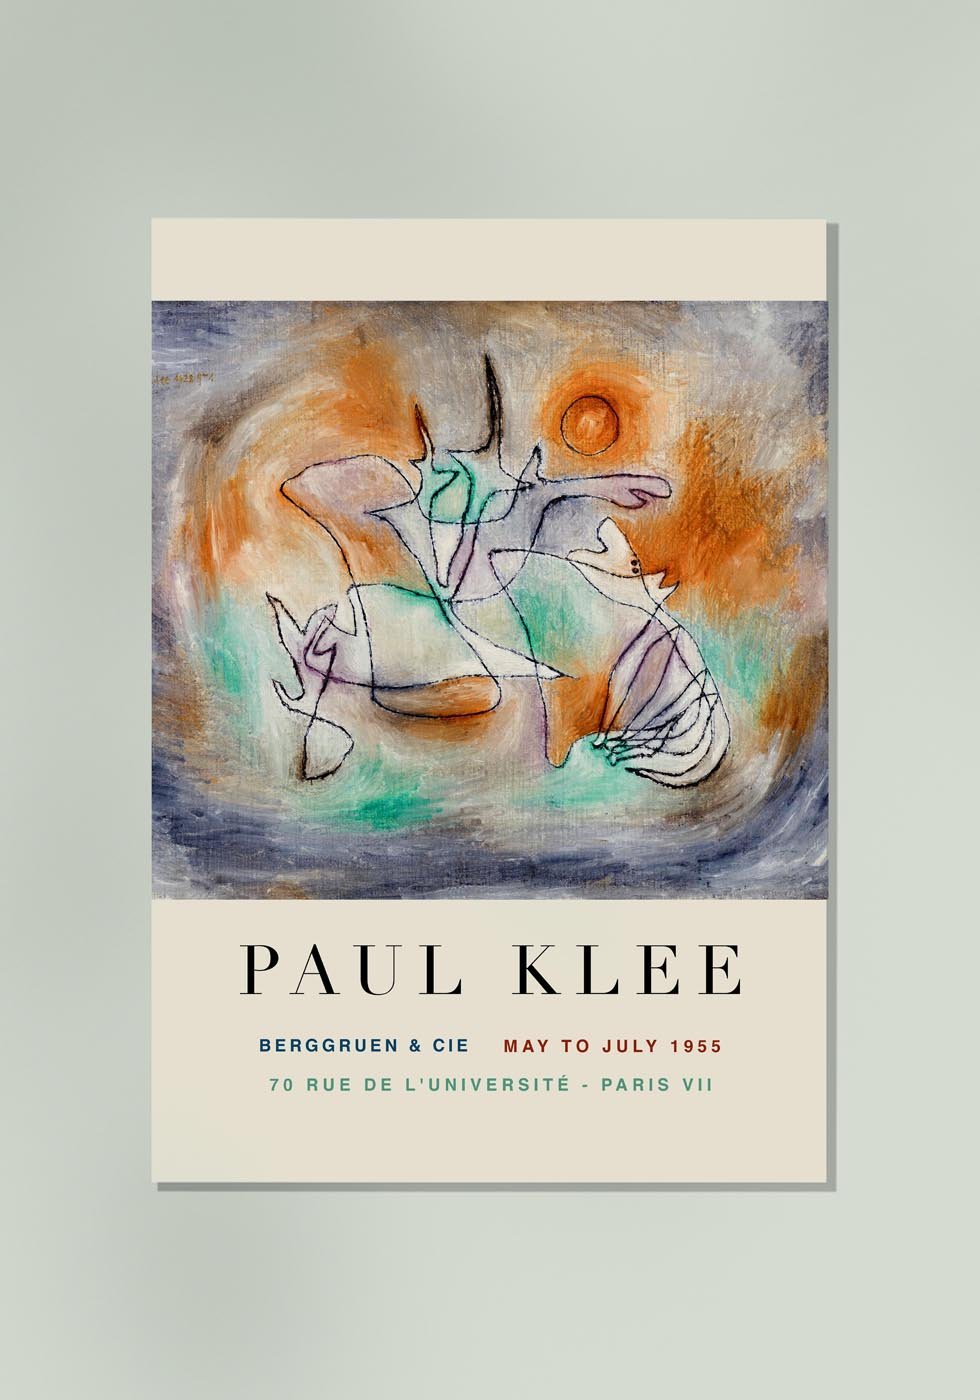 Paul Klee Howling Dog Art Exhibition Poster